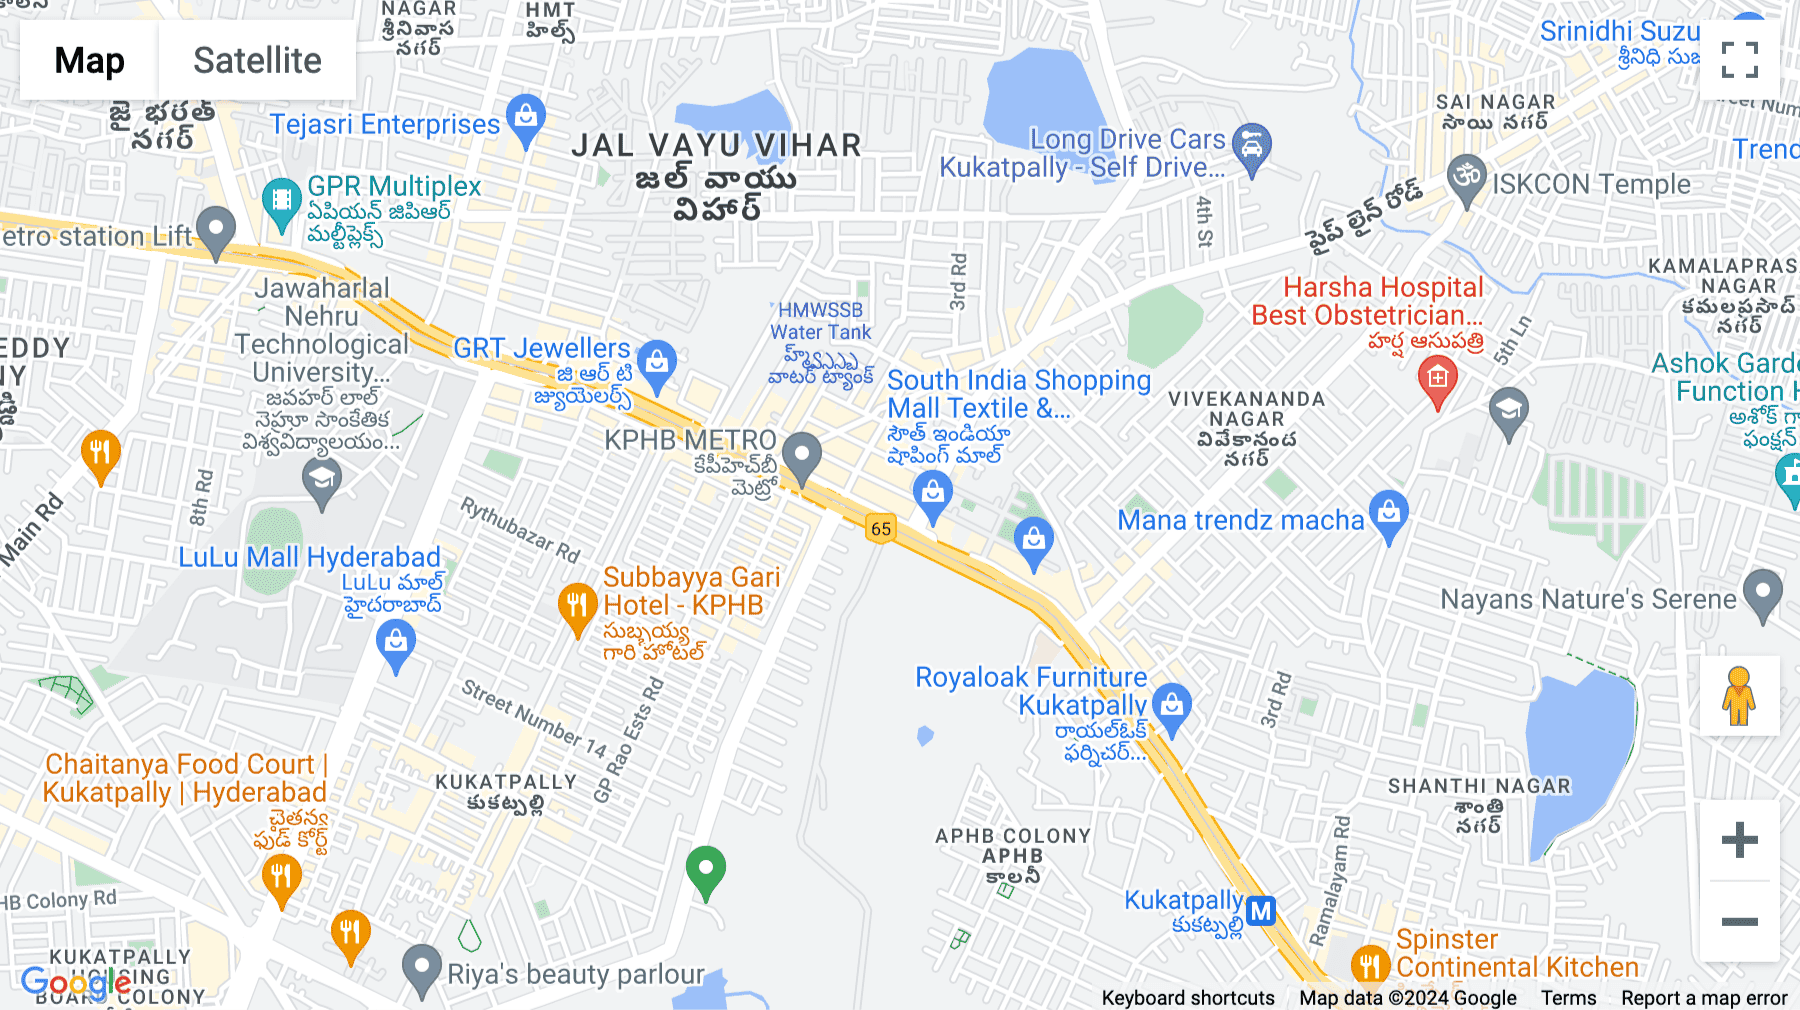 Click for interative map of 213-214 2nd Floor Alluri Trade Centre, Beside South India Shopping Mall, KPHB Main Road, Hyderabad